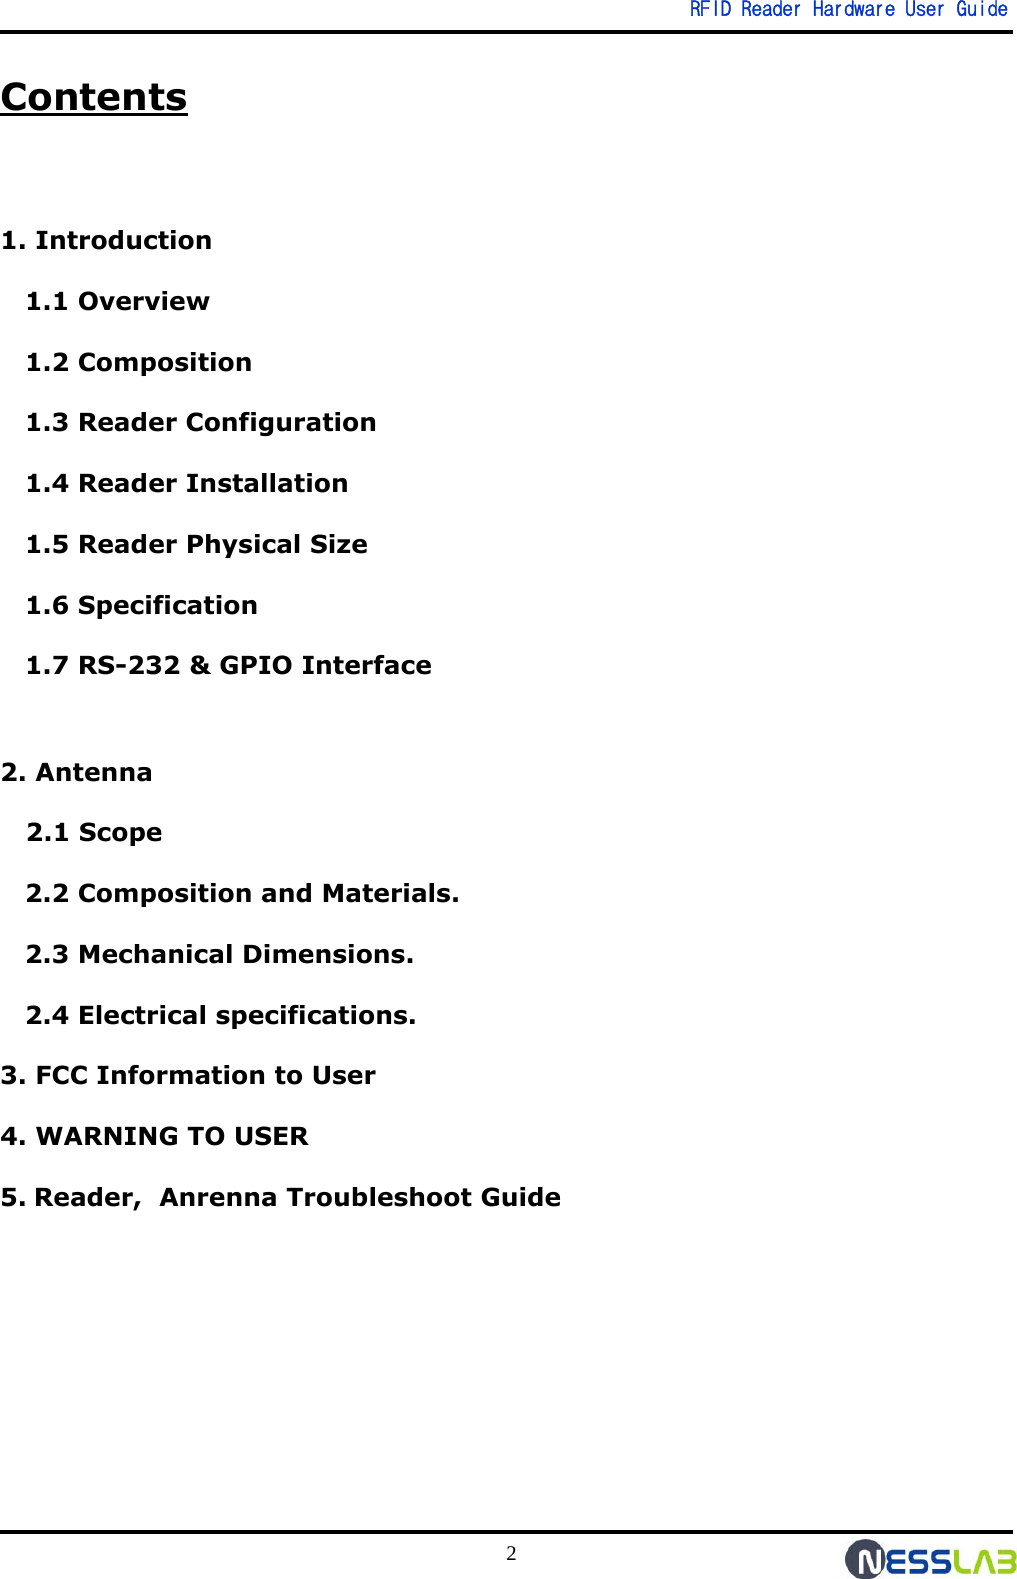   RFID Reader Hardware User Guide 2 Contents  1. Introduction 1.1 Overview 1.2 Composition 1.3 Reader Configuration 1.4 Reader Installation 1.5 Reader Physical Size 1.6 Specification 1.7 RS-232 &amp; GPIO Interface  2. Antenna    2.1 Scope 2.2 Composition and Materials. 2.3 Mechanical Dimensions. 2.4 Electrical specifications. 3. FCC Information to User 4. WARNING TO USER 5. Reader,  Anrenna Troubleshoot Guide 